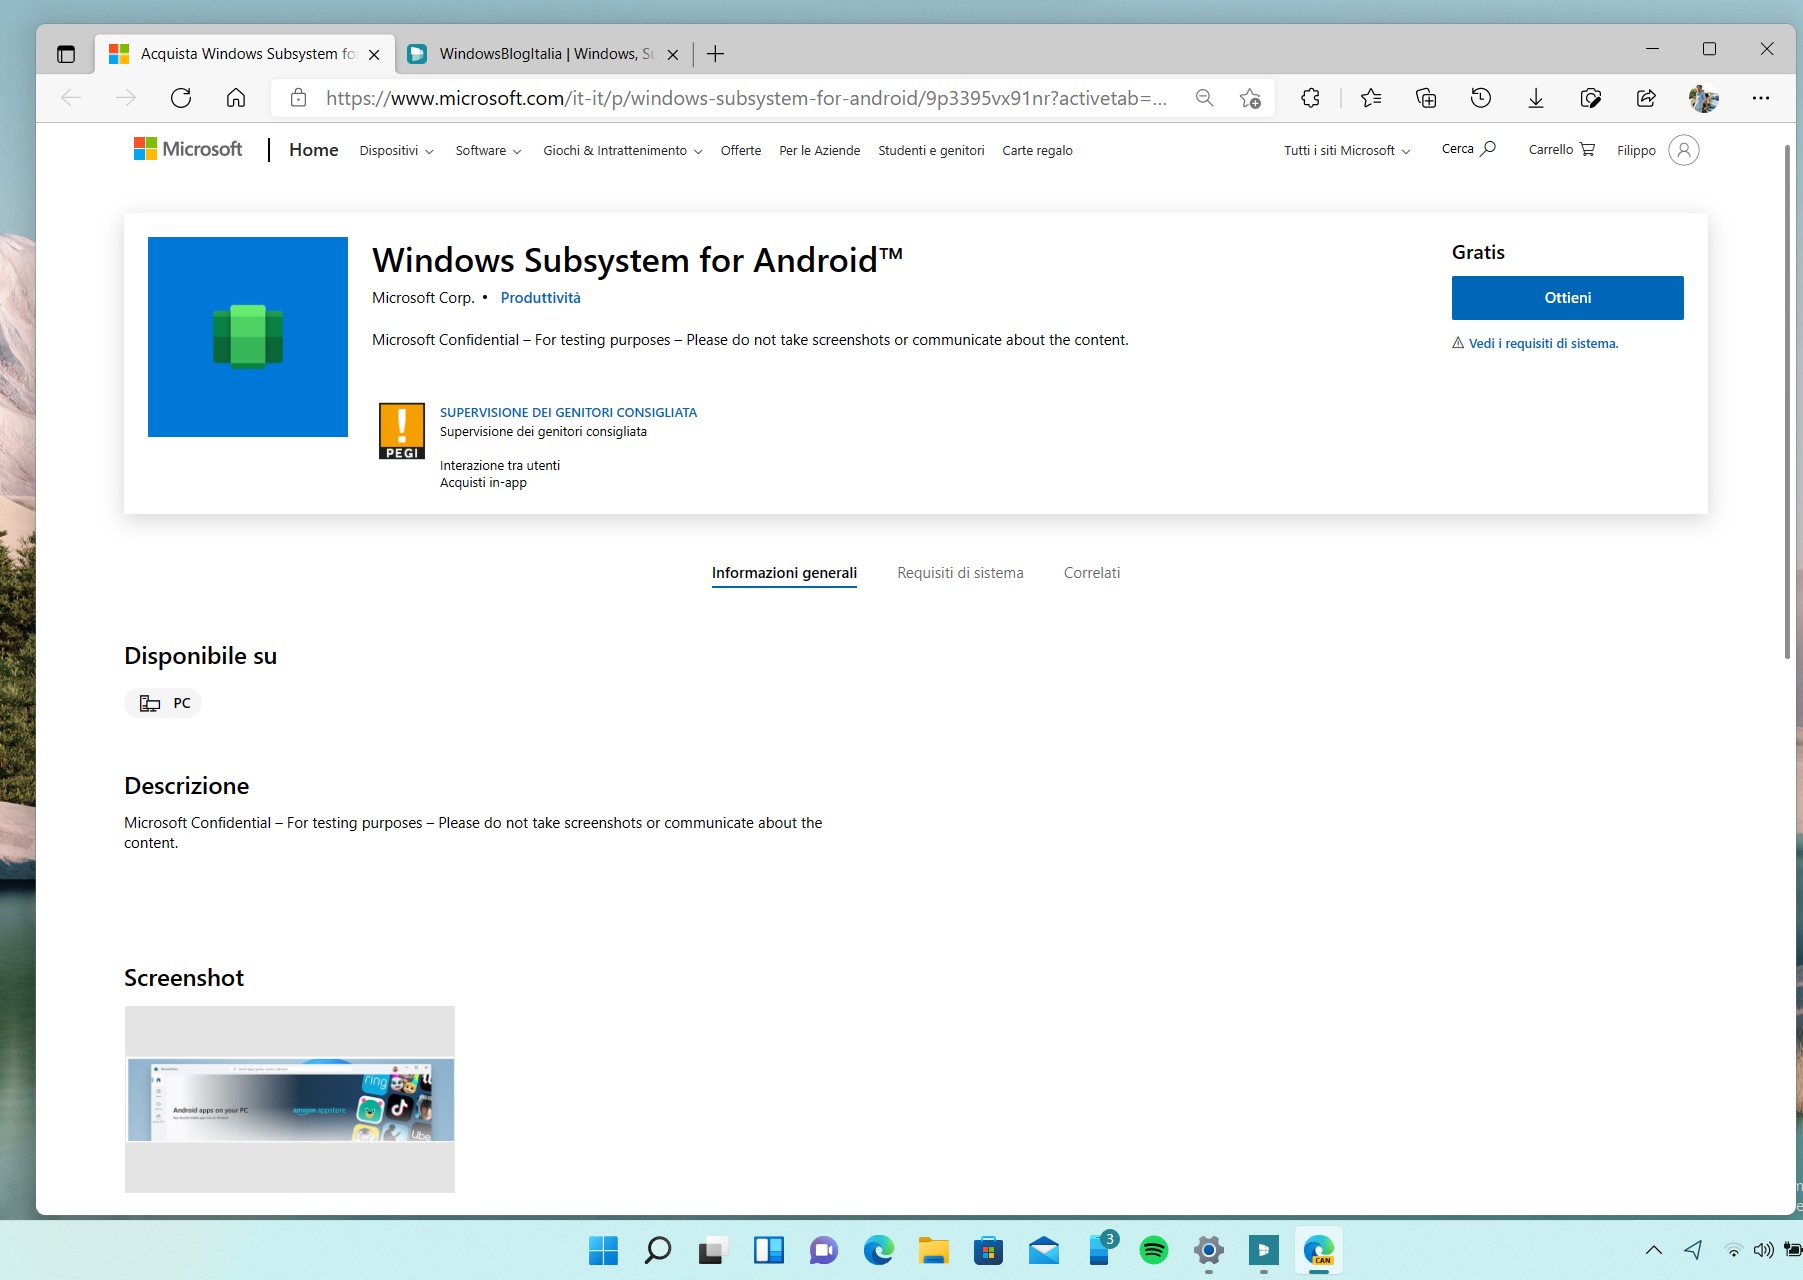 Windows Subsystem for Android - Microsoft Store